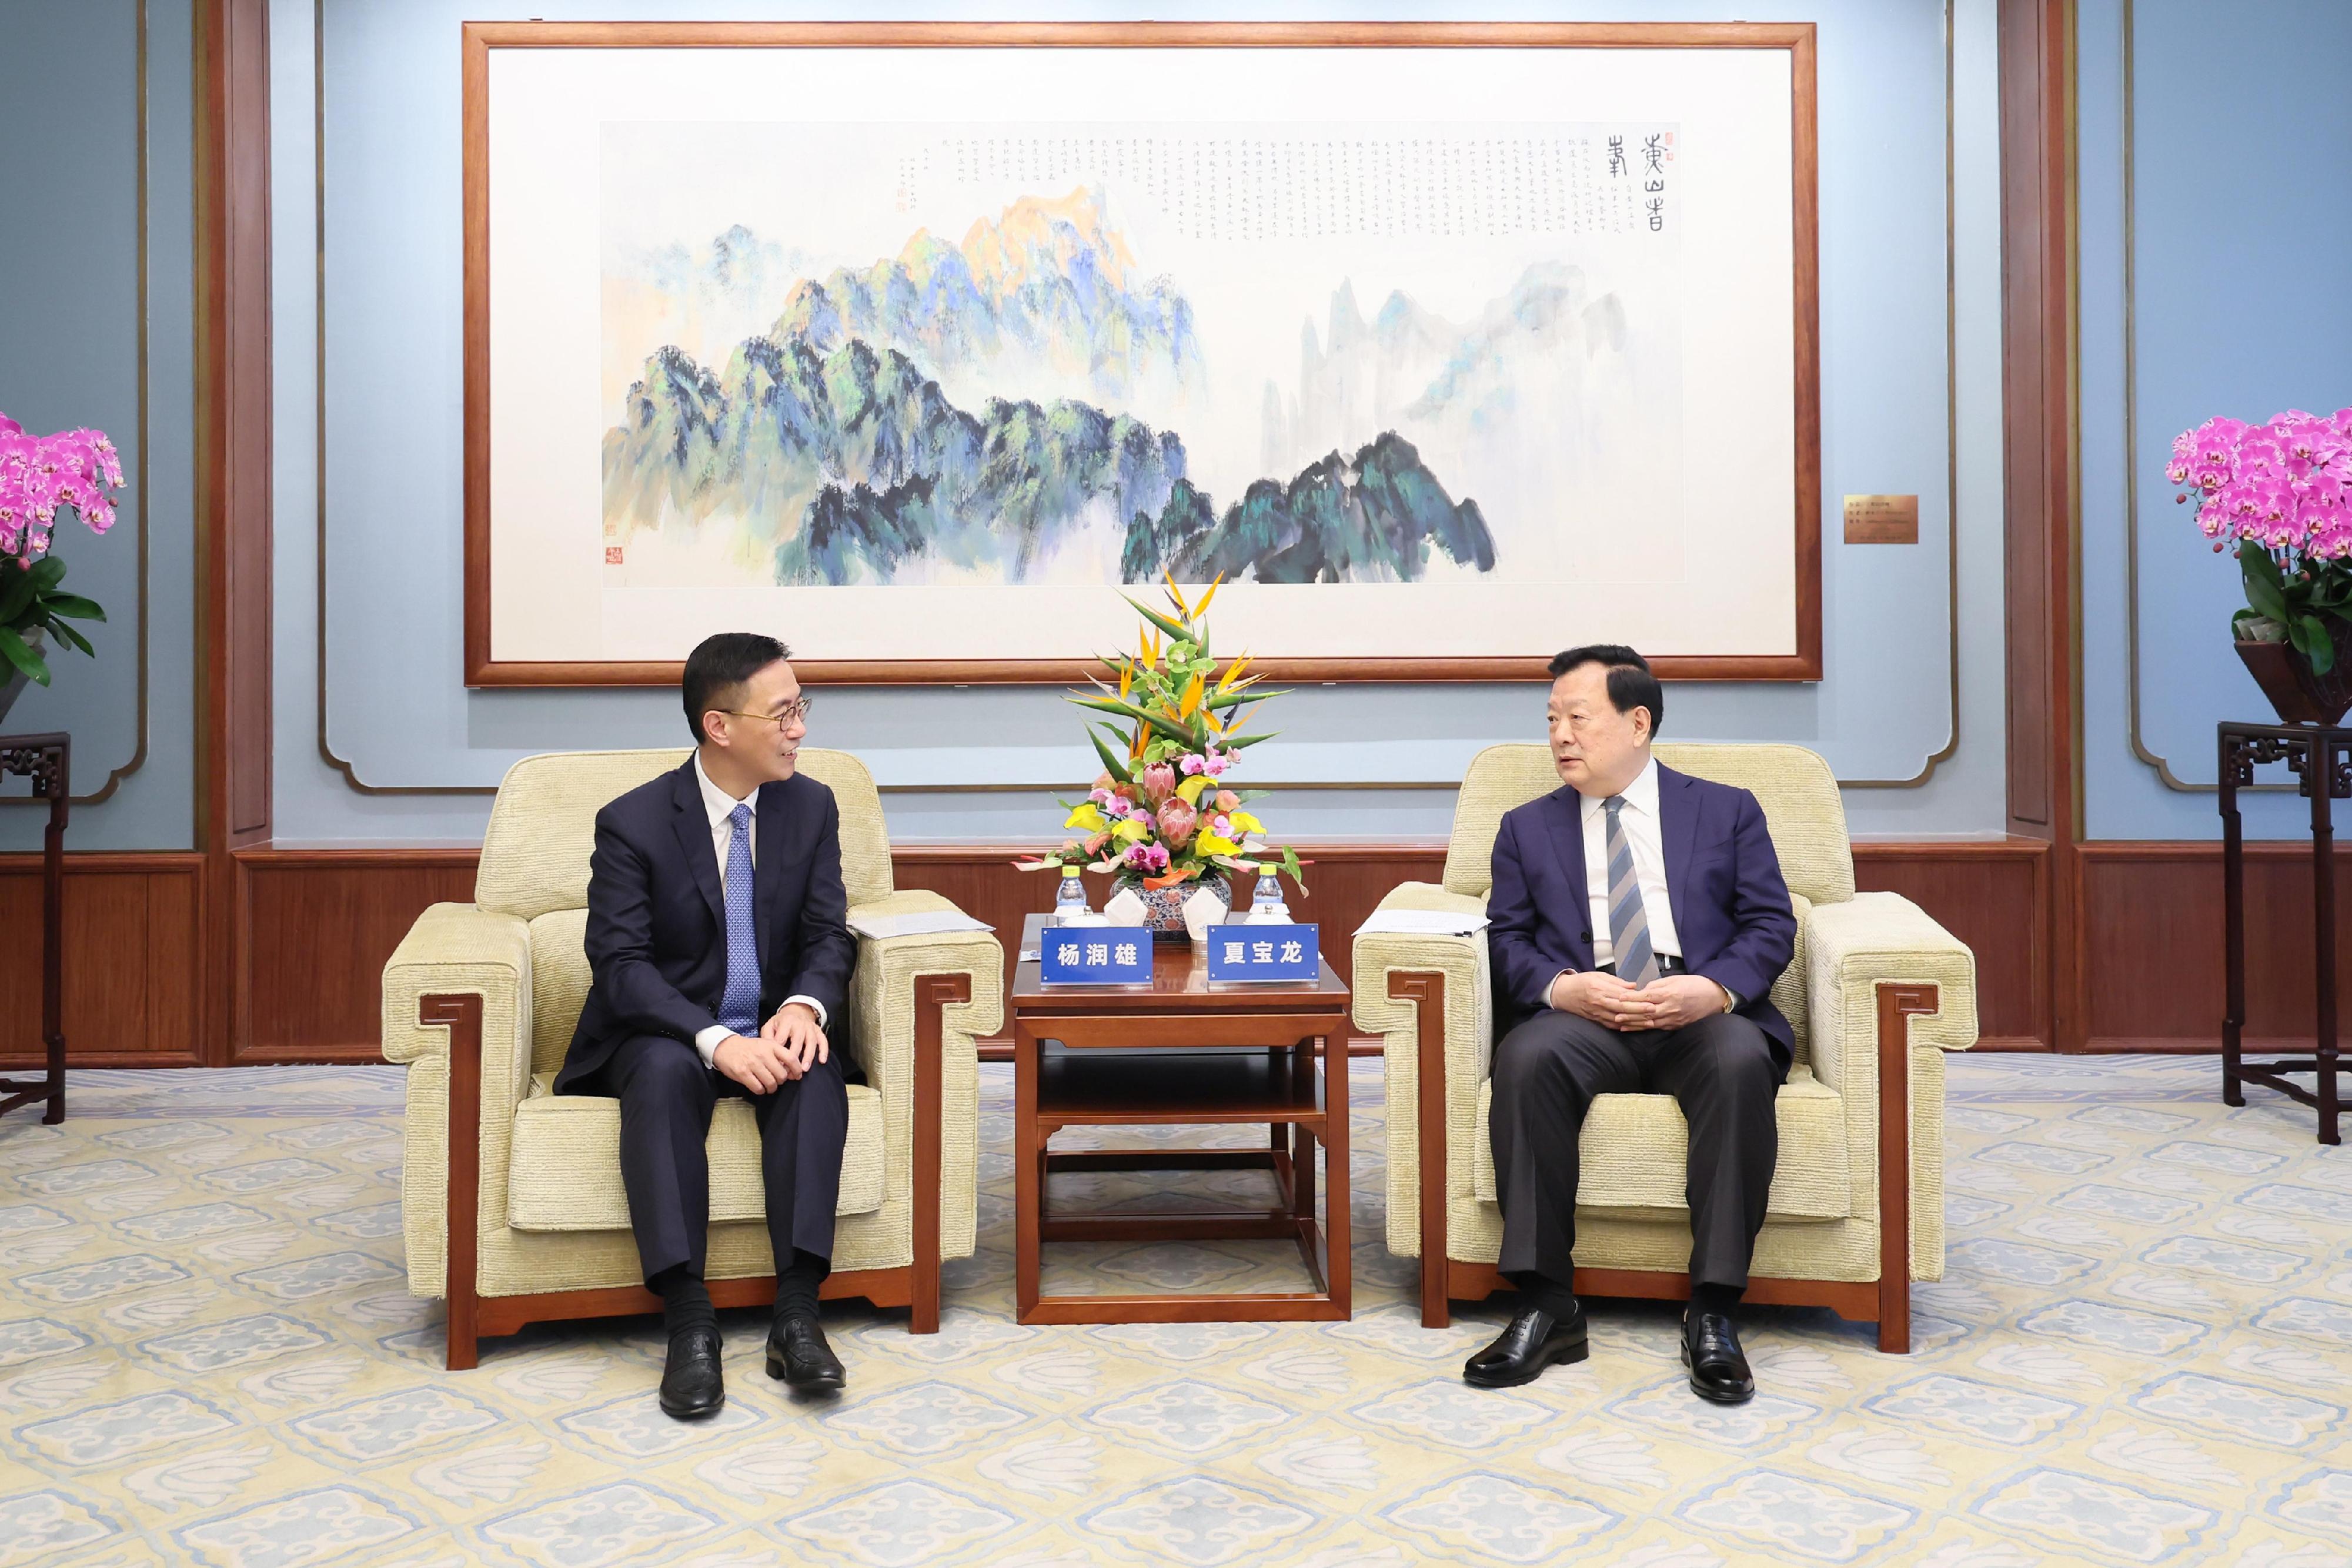 The Secretary for Culture, Sports and Tourism, Mr Kevin Yeung (left), visited Beijing. He first met with the Director of the Hong Kong and Macao Affairs Office of the State Council, Mr Xia Baolong (right), yesterday (May 9) and introduced the latest work of the Culture, Sports and Tourism Bureau.